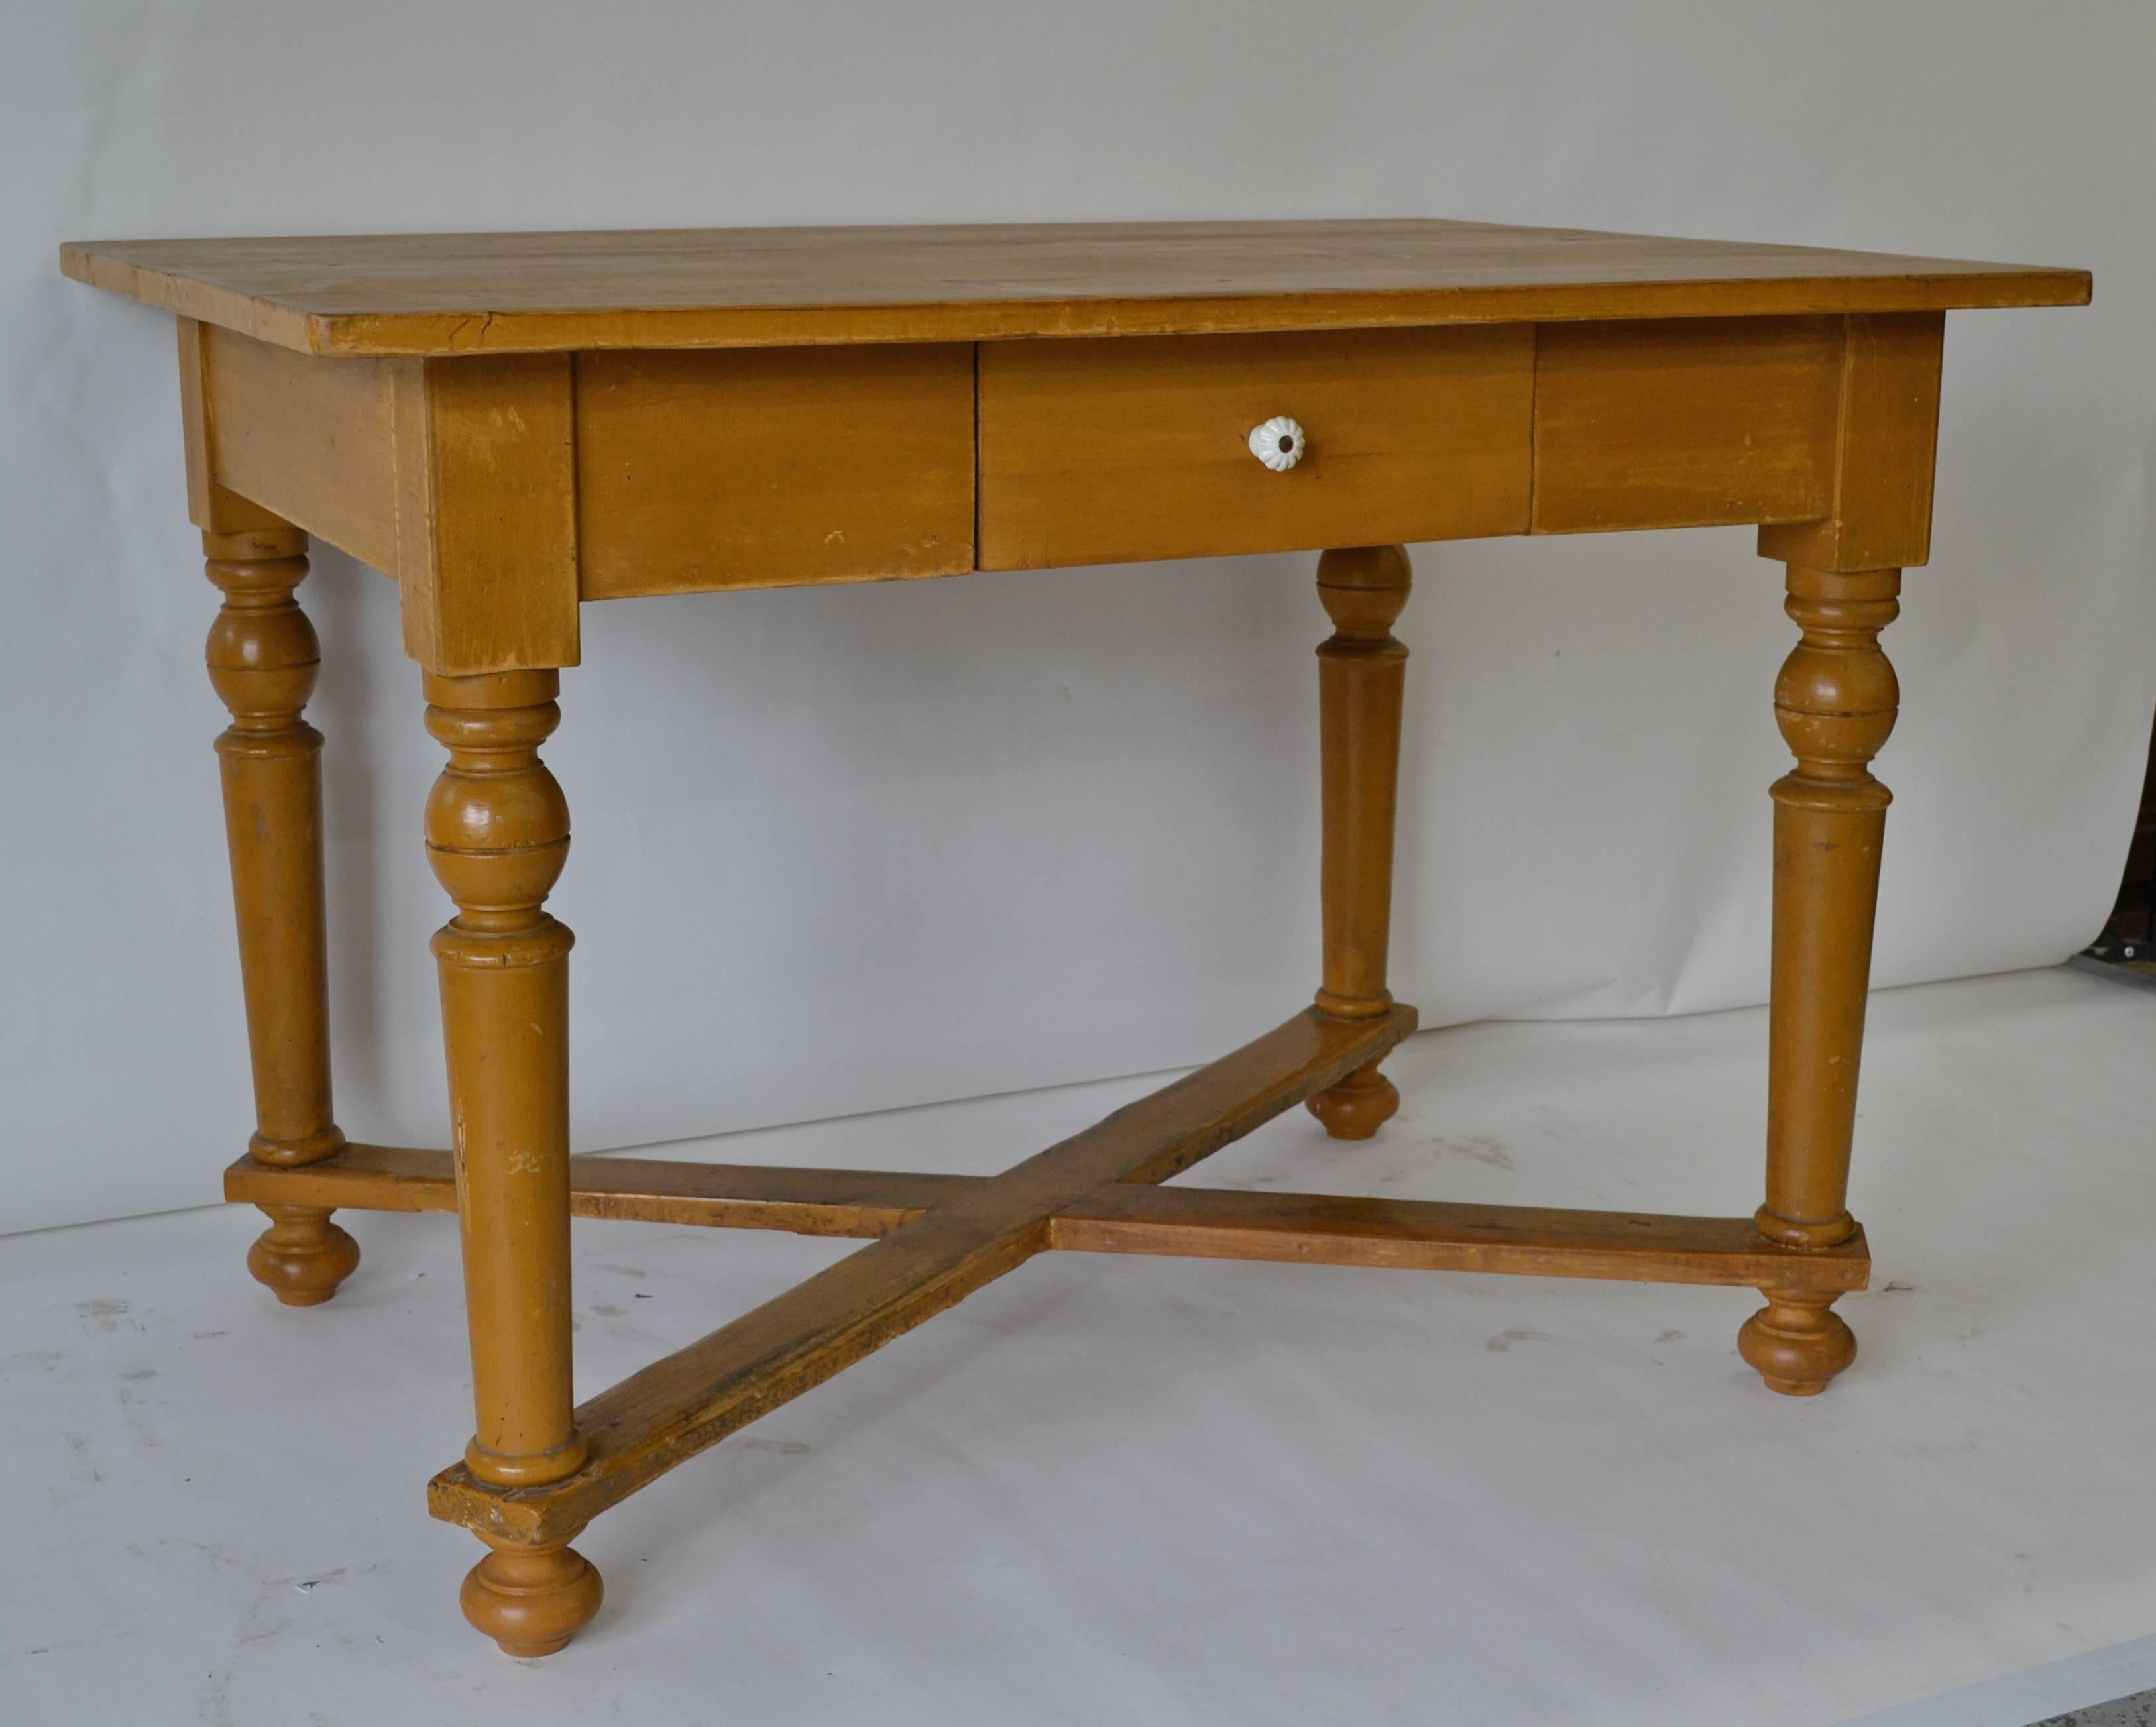 This attractive writing table has four nicely turned legs joined at the foot with a well-worn cross stretcher and a single hand-cut dovetailed drawer in the front apron. The top is in polished pine and the top edge and base in old worn mustard paint.